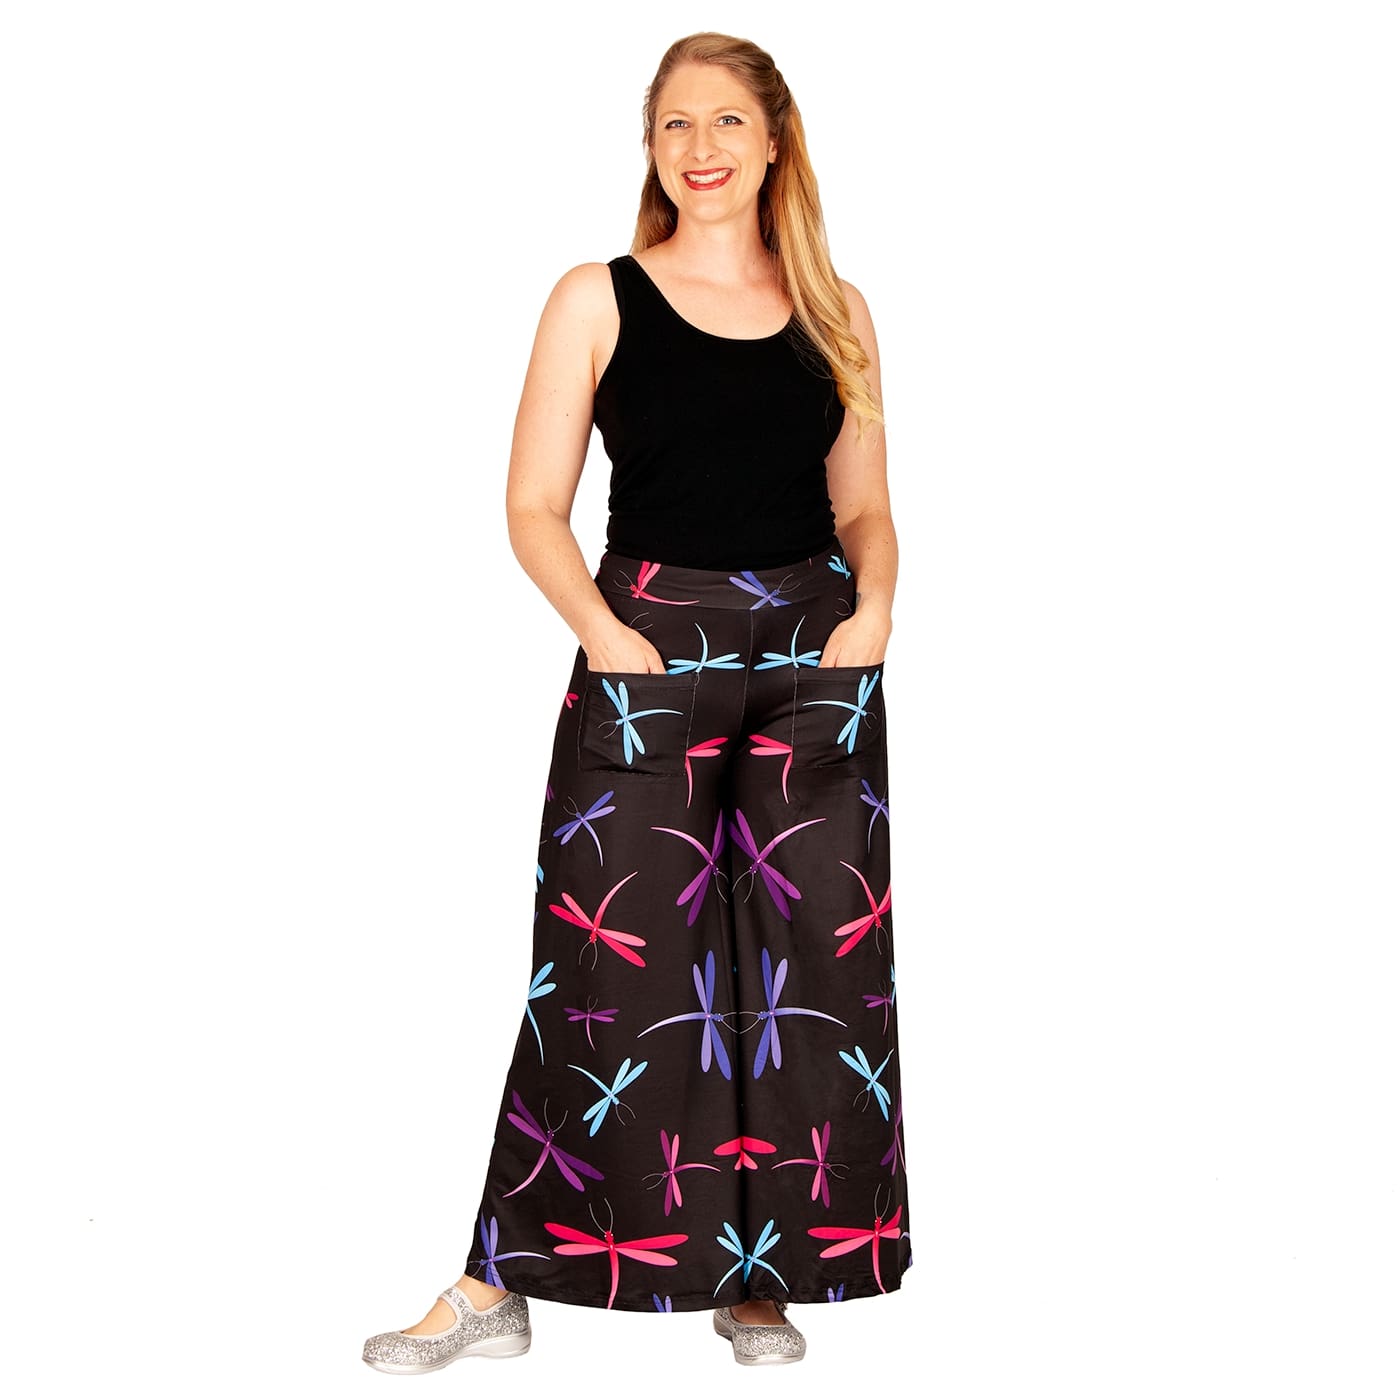 Midnight Dreaming Wide Leg Pants by RainbowsAndFairies.com.au (Pants With Pockets - Flares - Pallazo Pants - Dragonfly - Firefly - Mod Retro) - SKU: CL_WIDEL_DREAM_MID - Pic-02